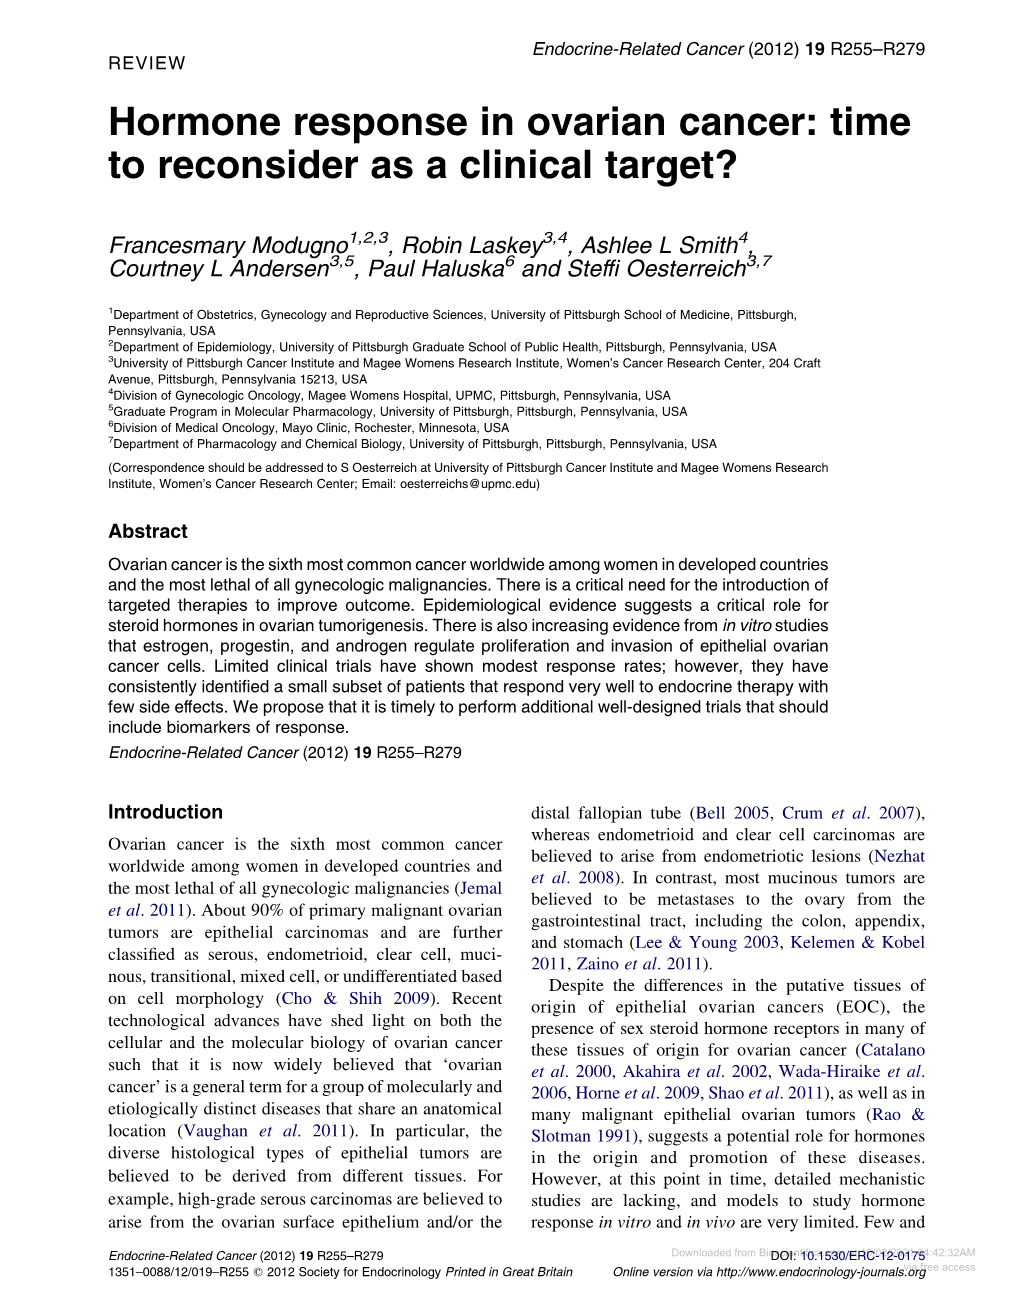 Hormone Response in Ovarian Cancer: Time to Reconsider As a Clinical Target?